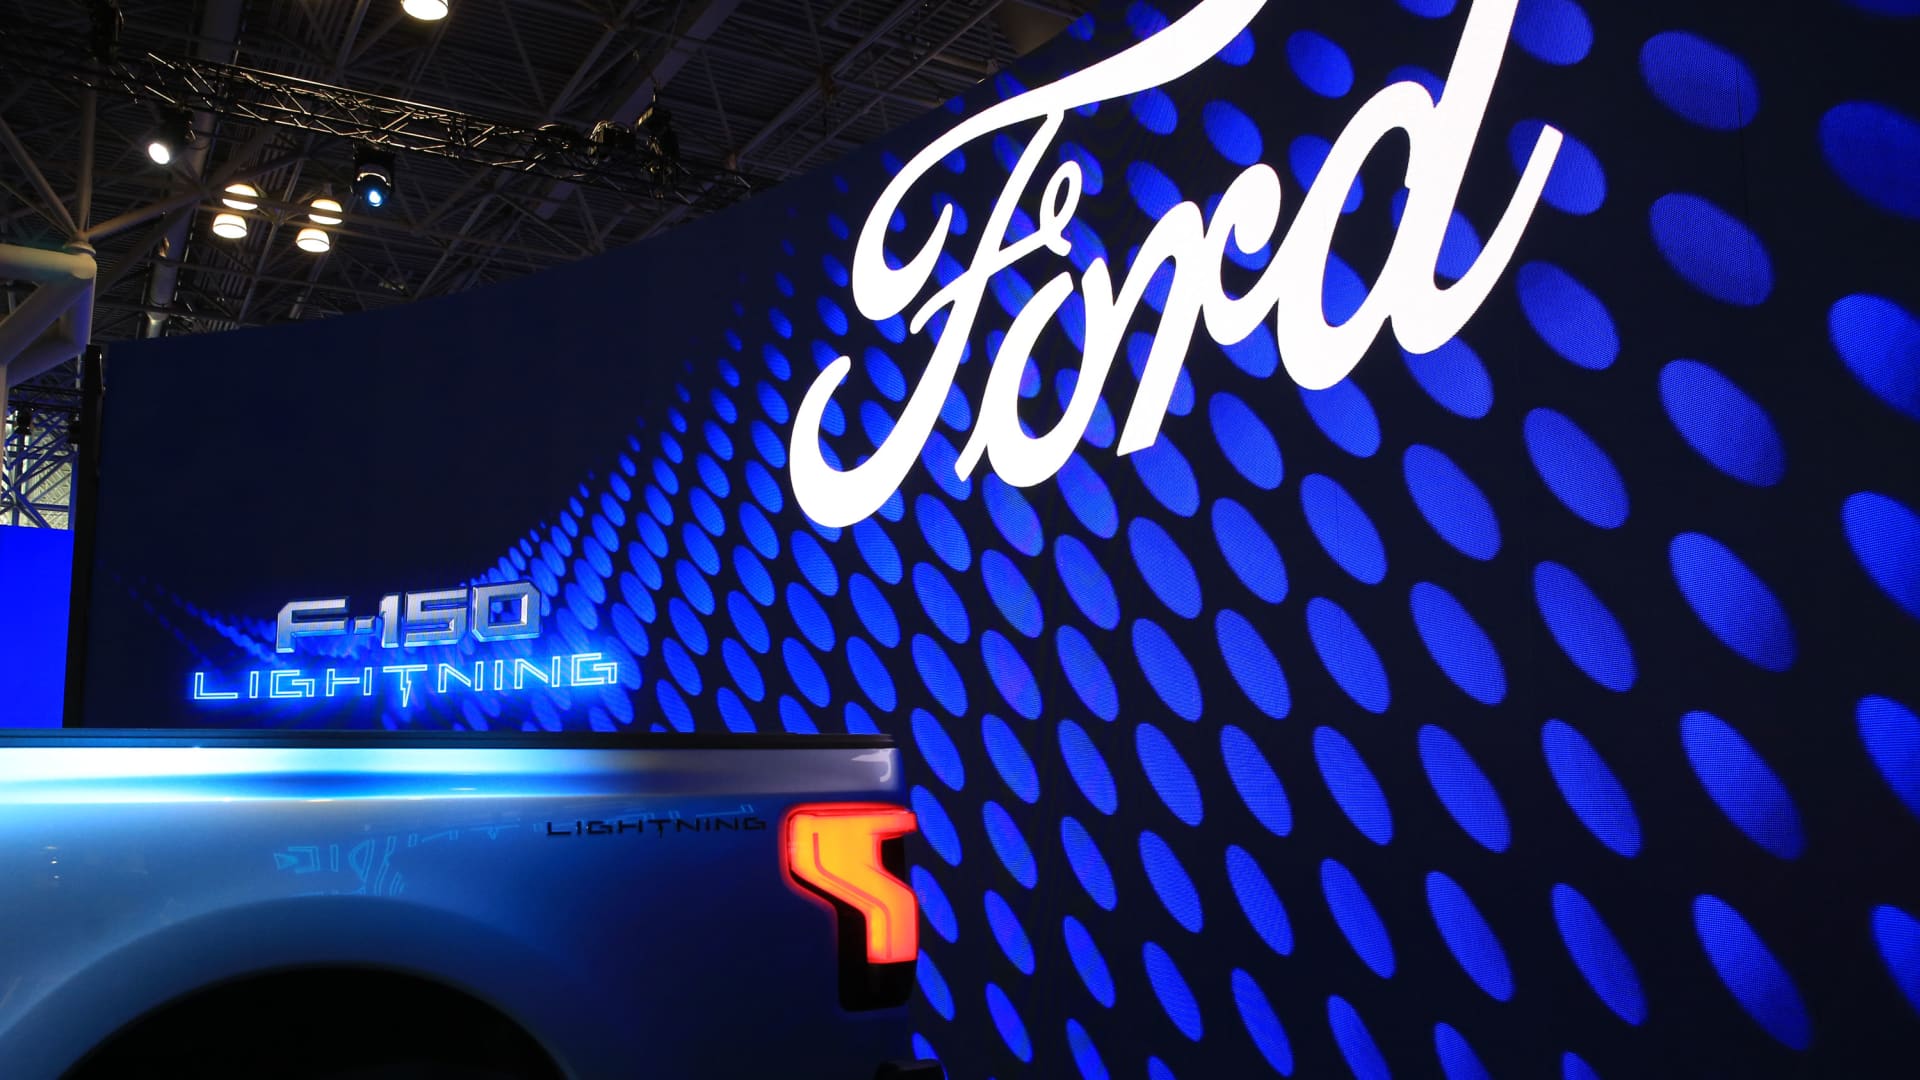 Ford's sales up 16% in third quarter, despite September decline - CNBC (Picture 1)